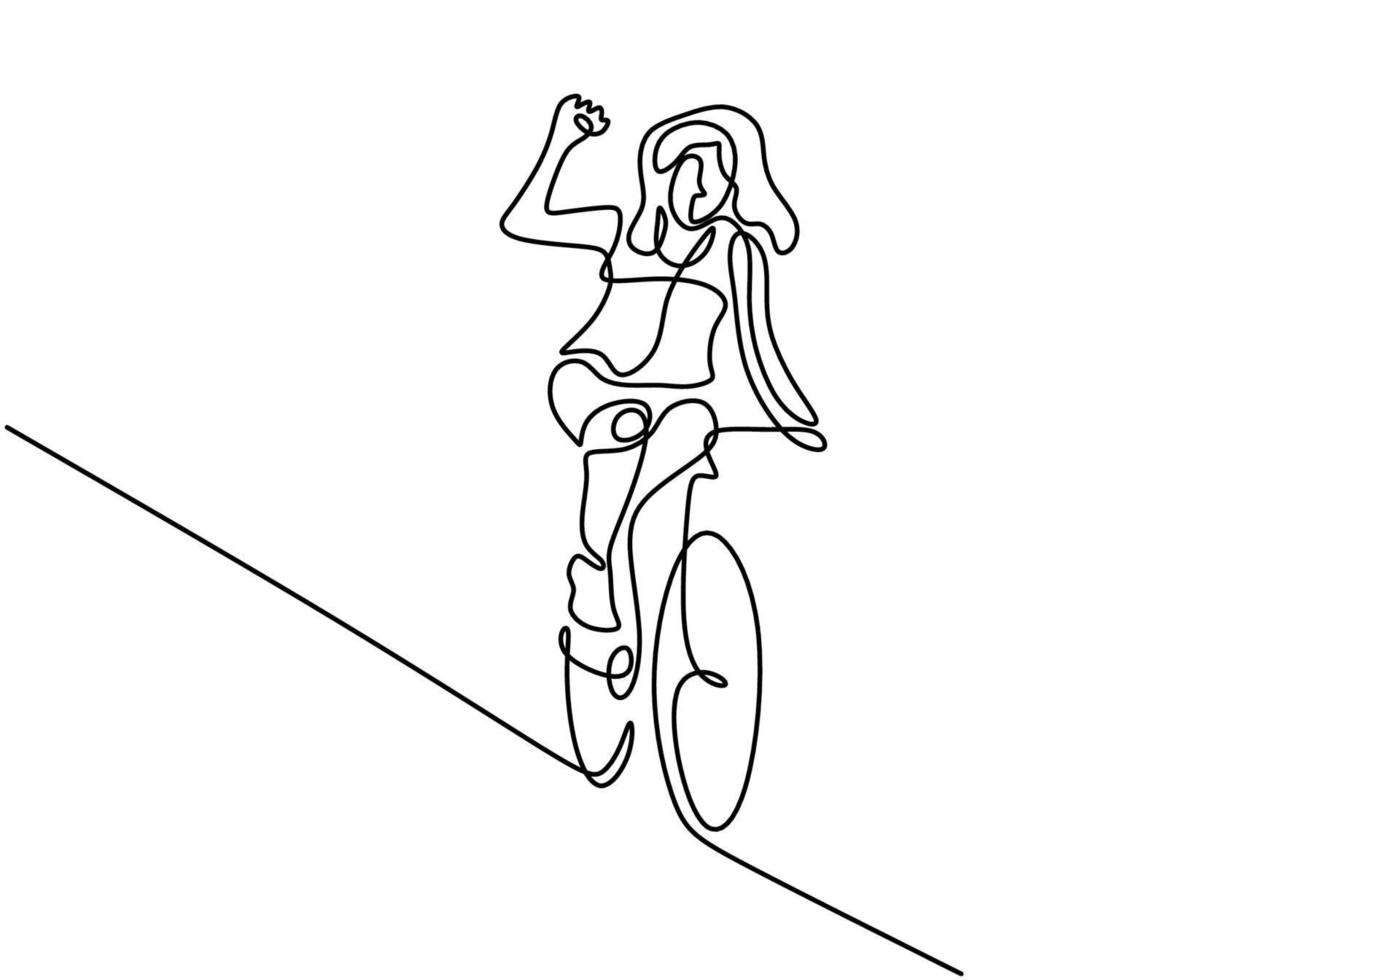 Continuous line drawing of young energetic sporty woman bicycle racer focus train her skill at cycling track. Athletic girl pedaling her bike so fast. Road cyclist concept. Vector illustration